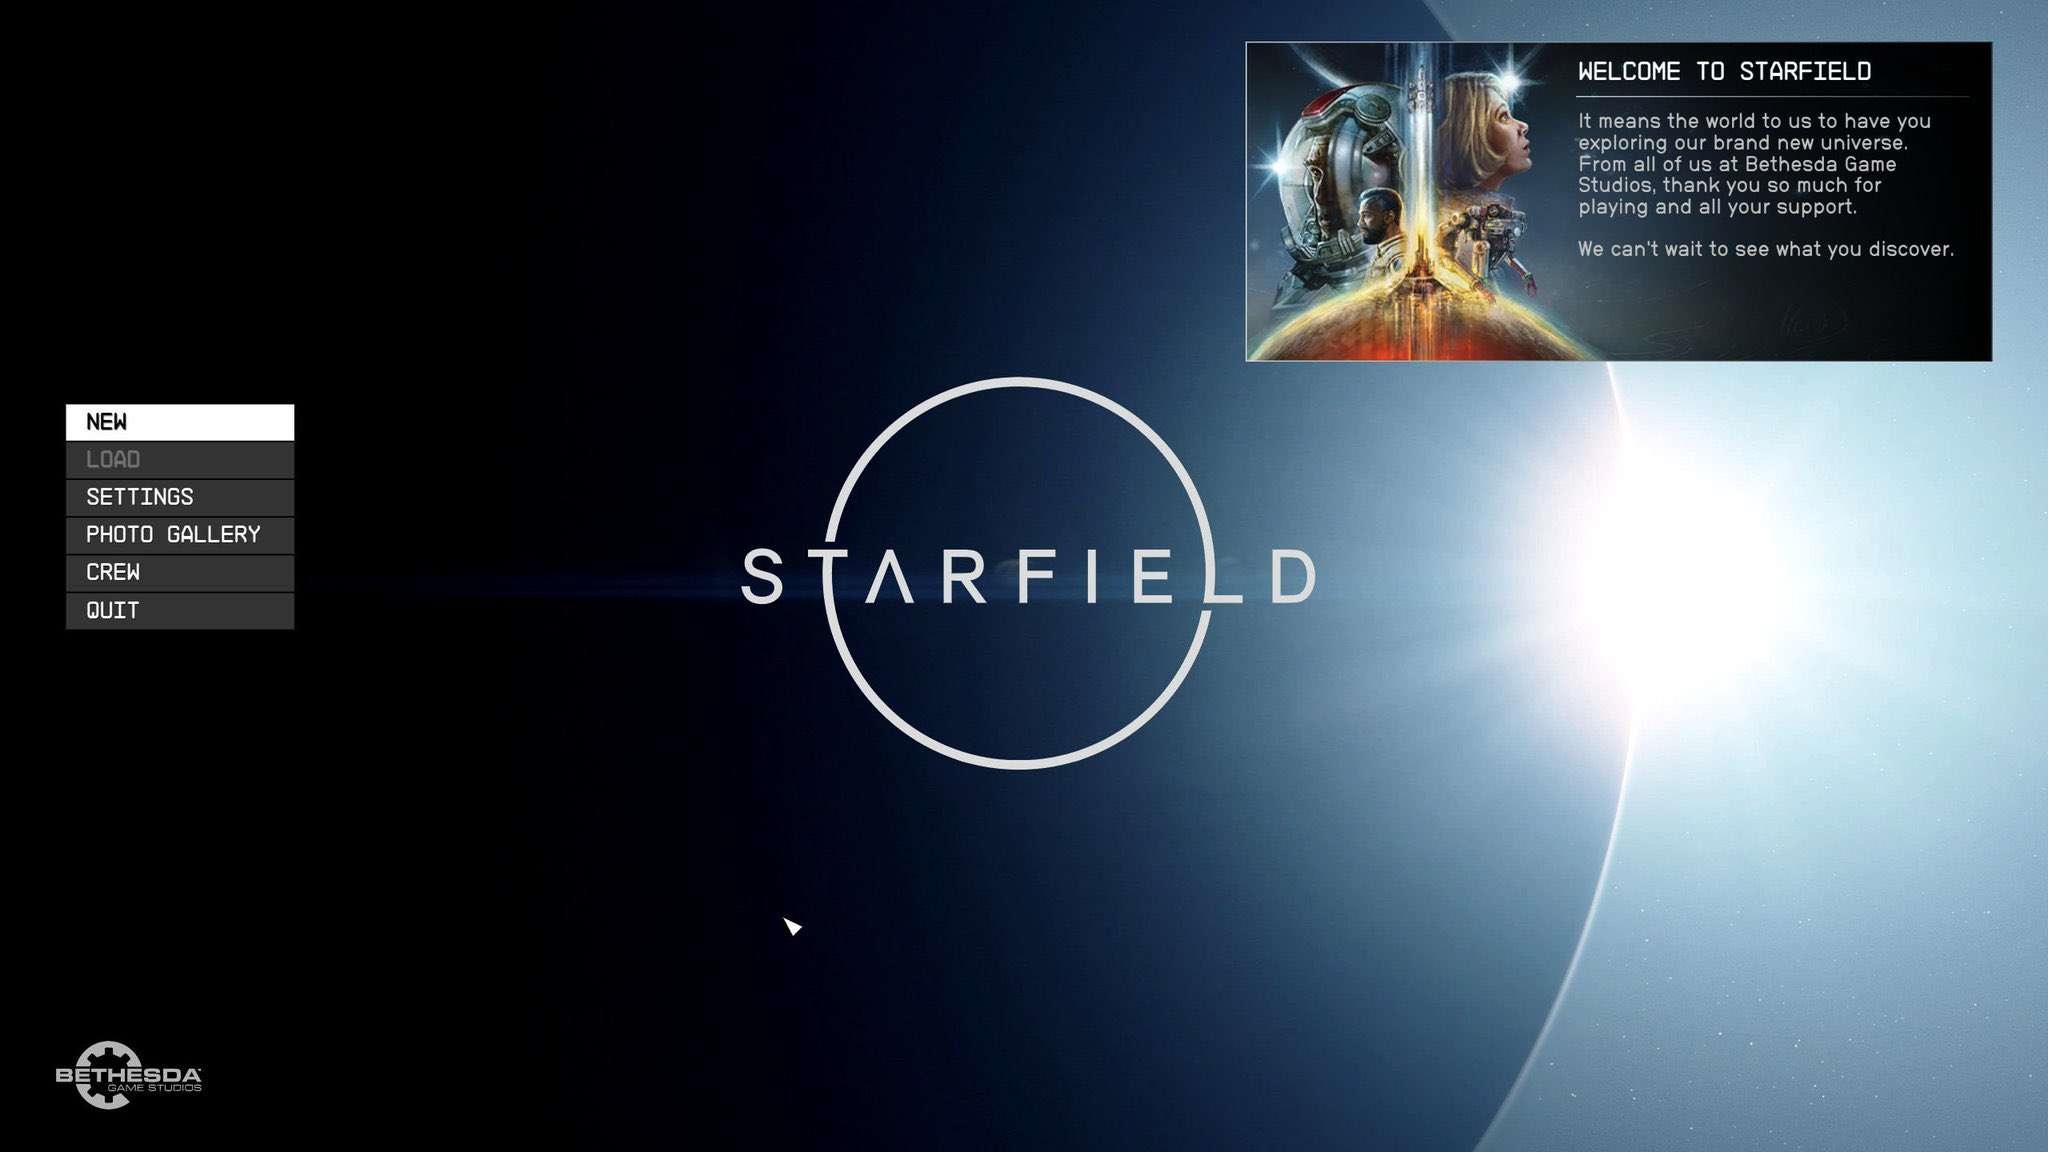 Starfield Leaked Title Screen Sparked A Brawl That Questions Video Game Writers’ Relevance 